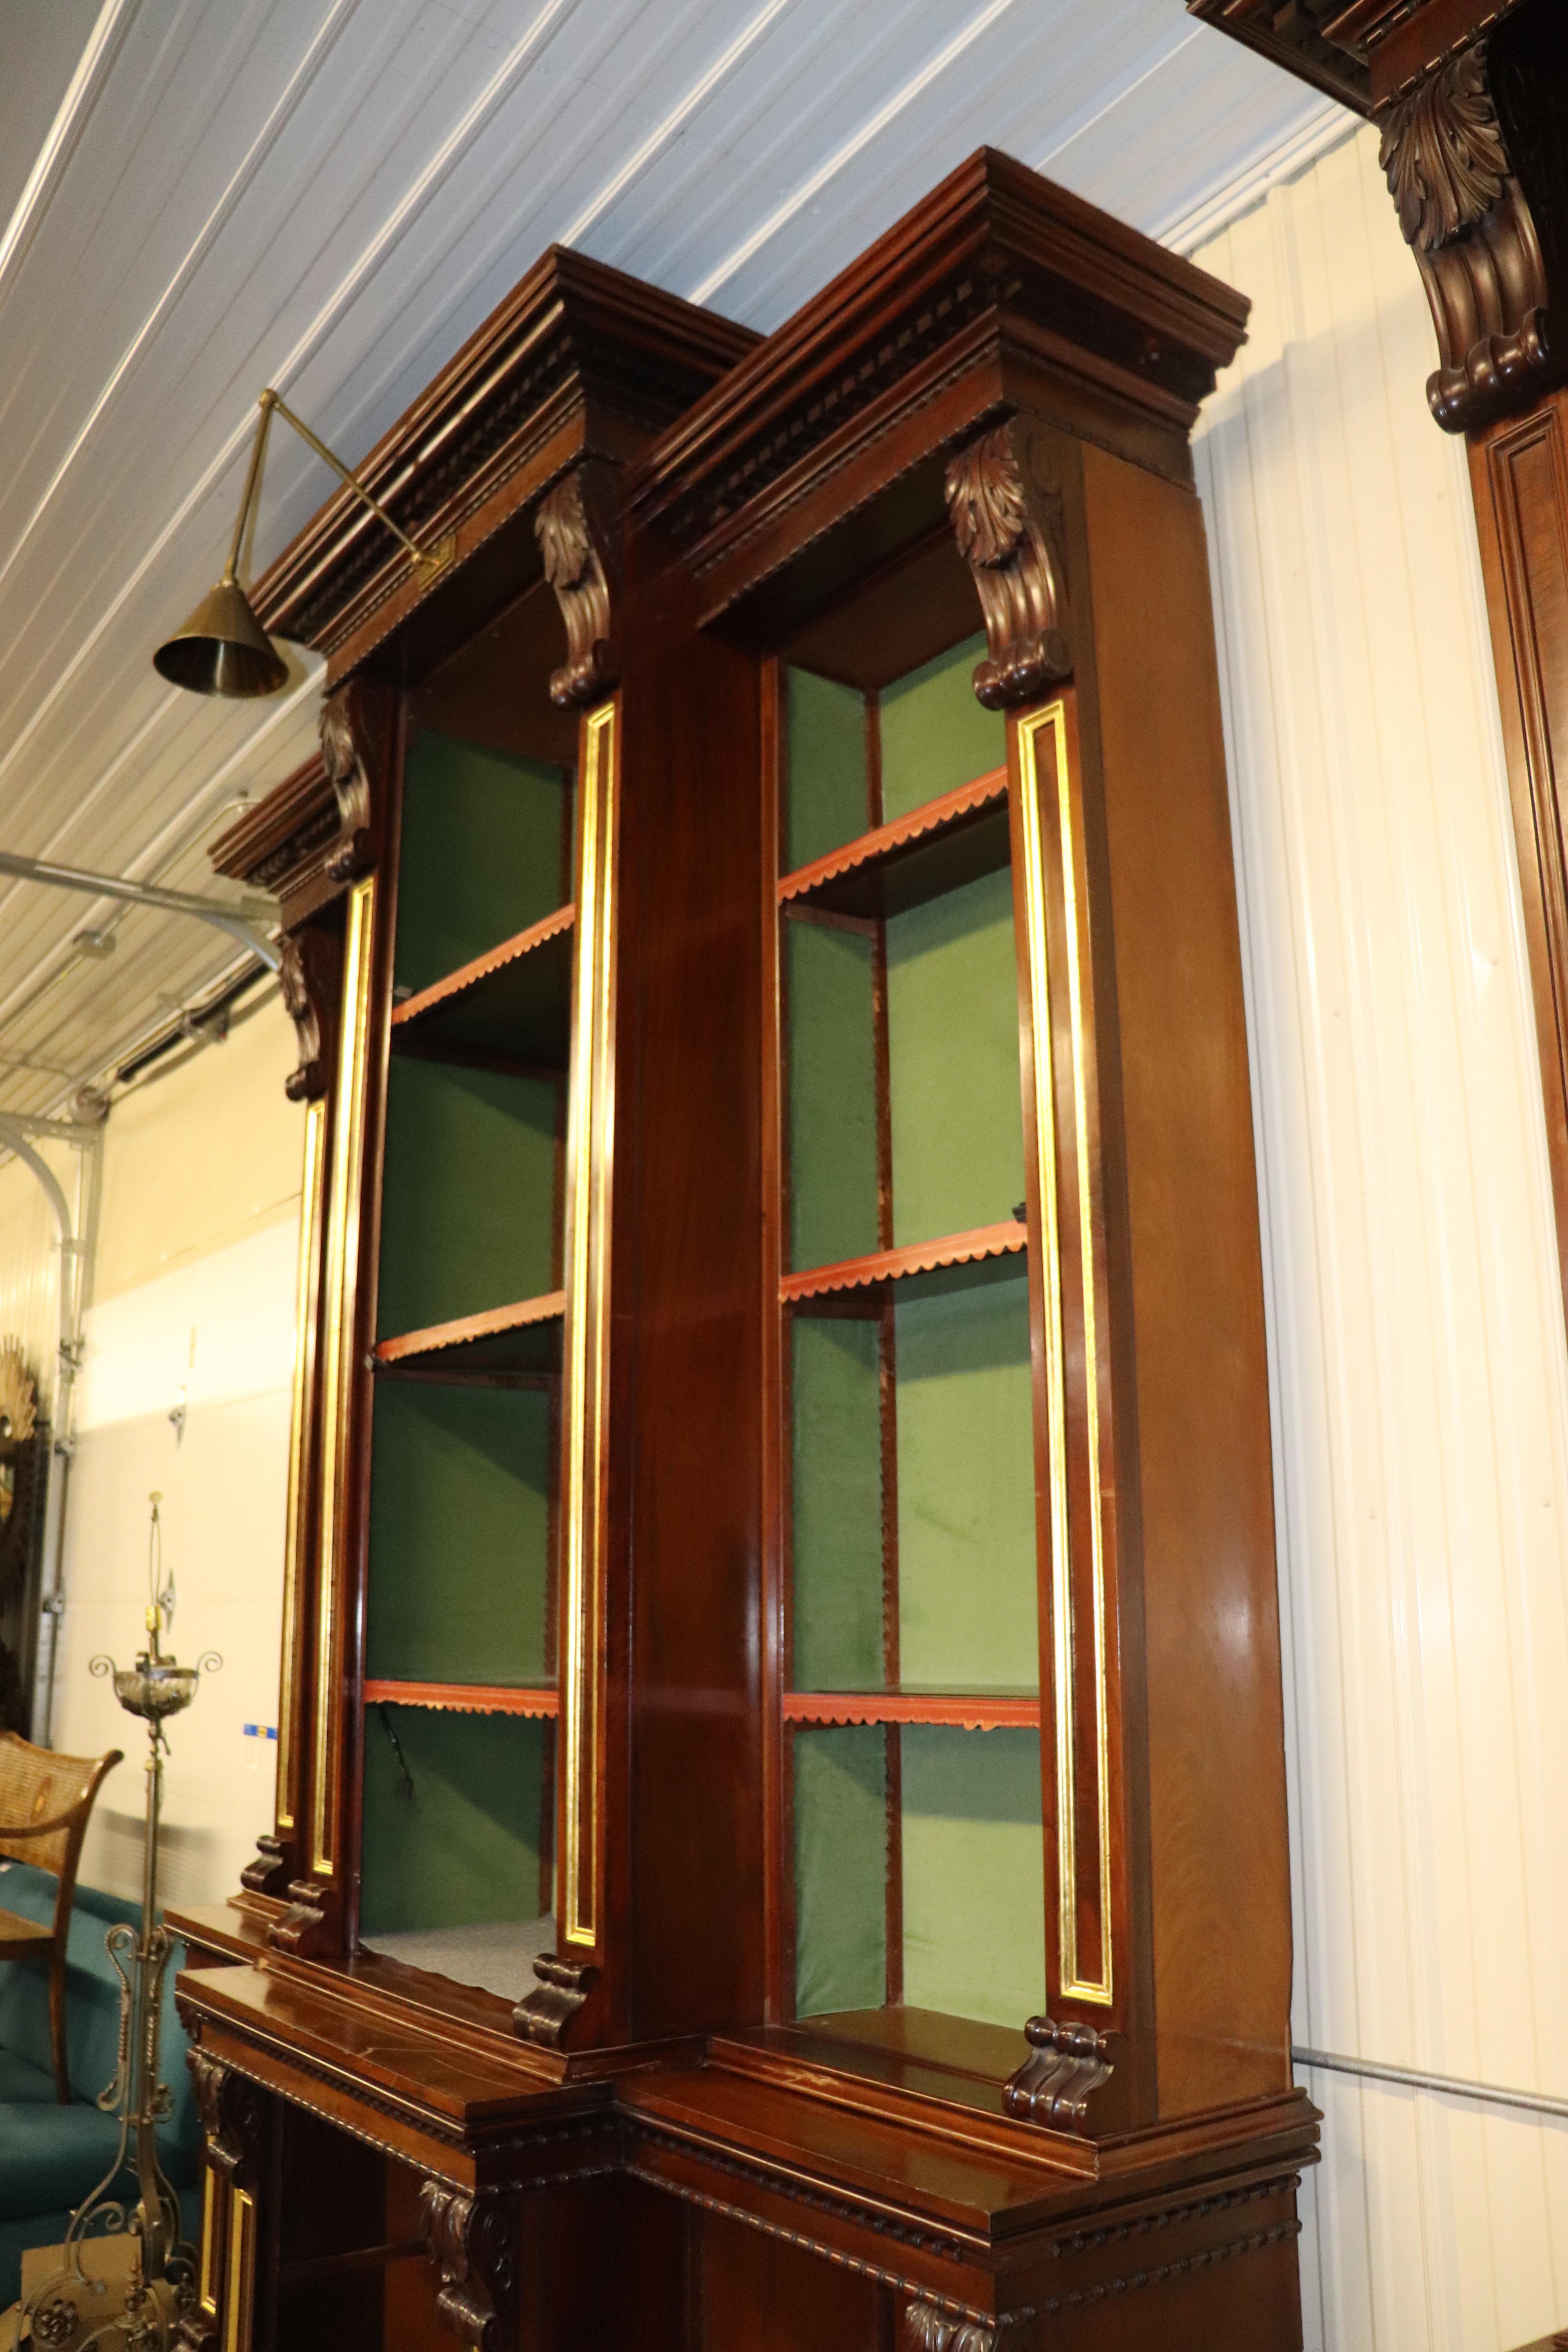 Late 19th Century Monumental Solid Carved Tall Walnut Victorian Bookcase Bookshelf, circa 1870s